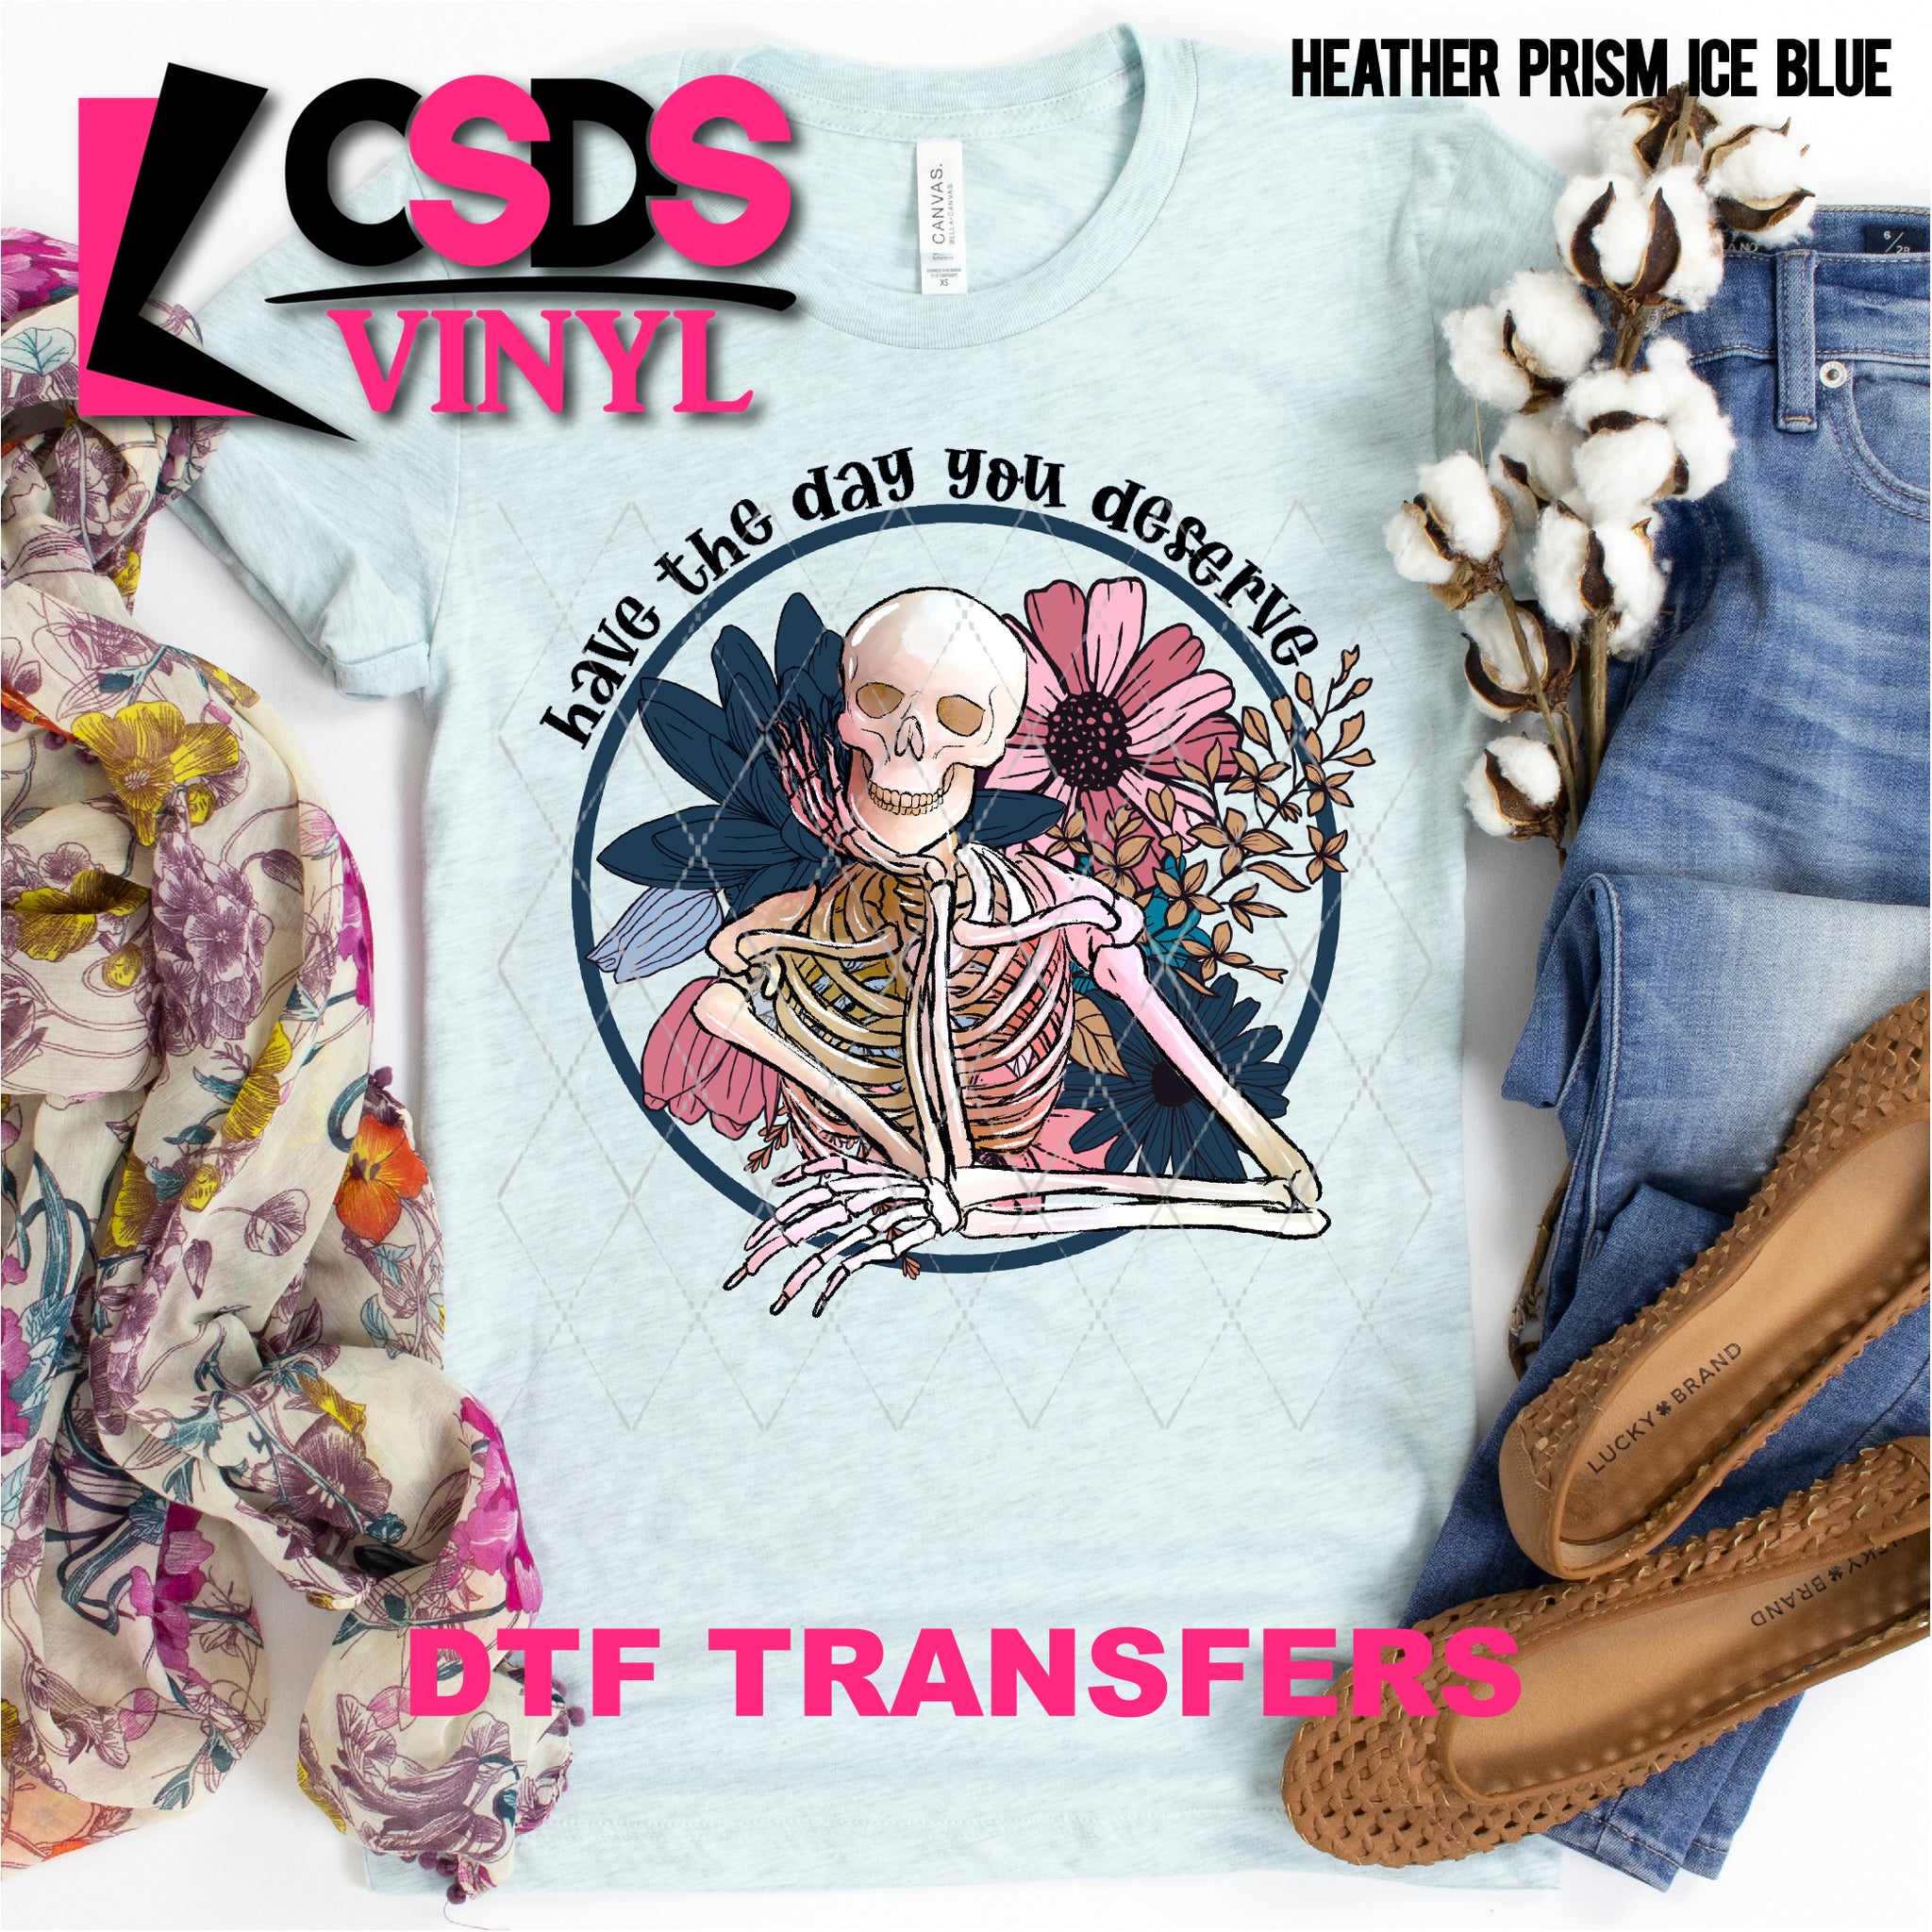 Wholesale dtf transfers, say goodbye to screen print transfers and HEL, dtfc transfers